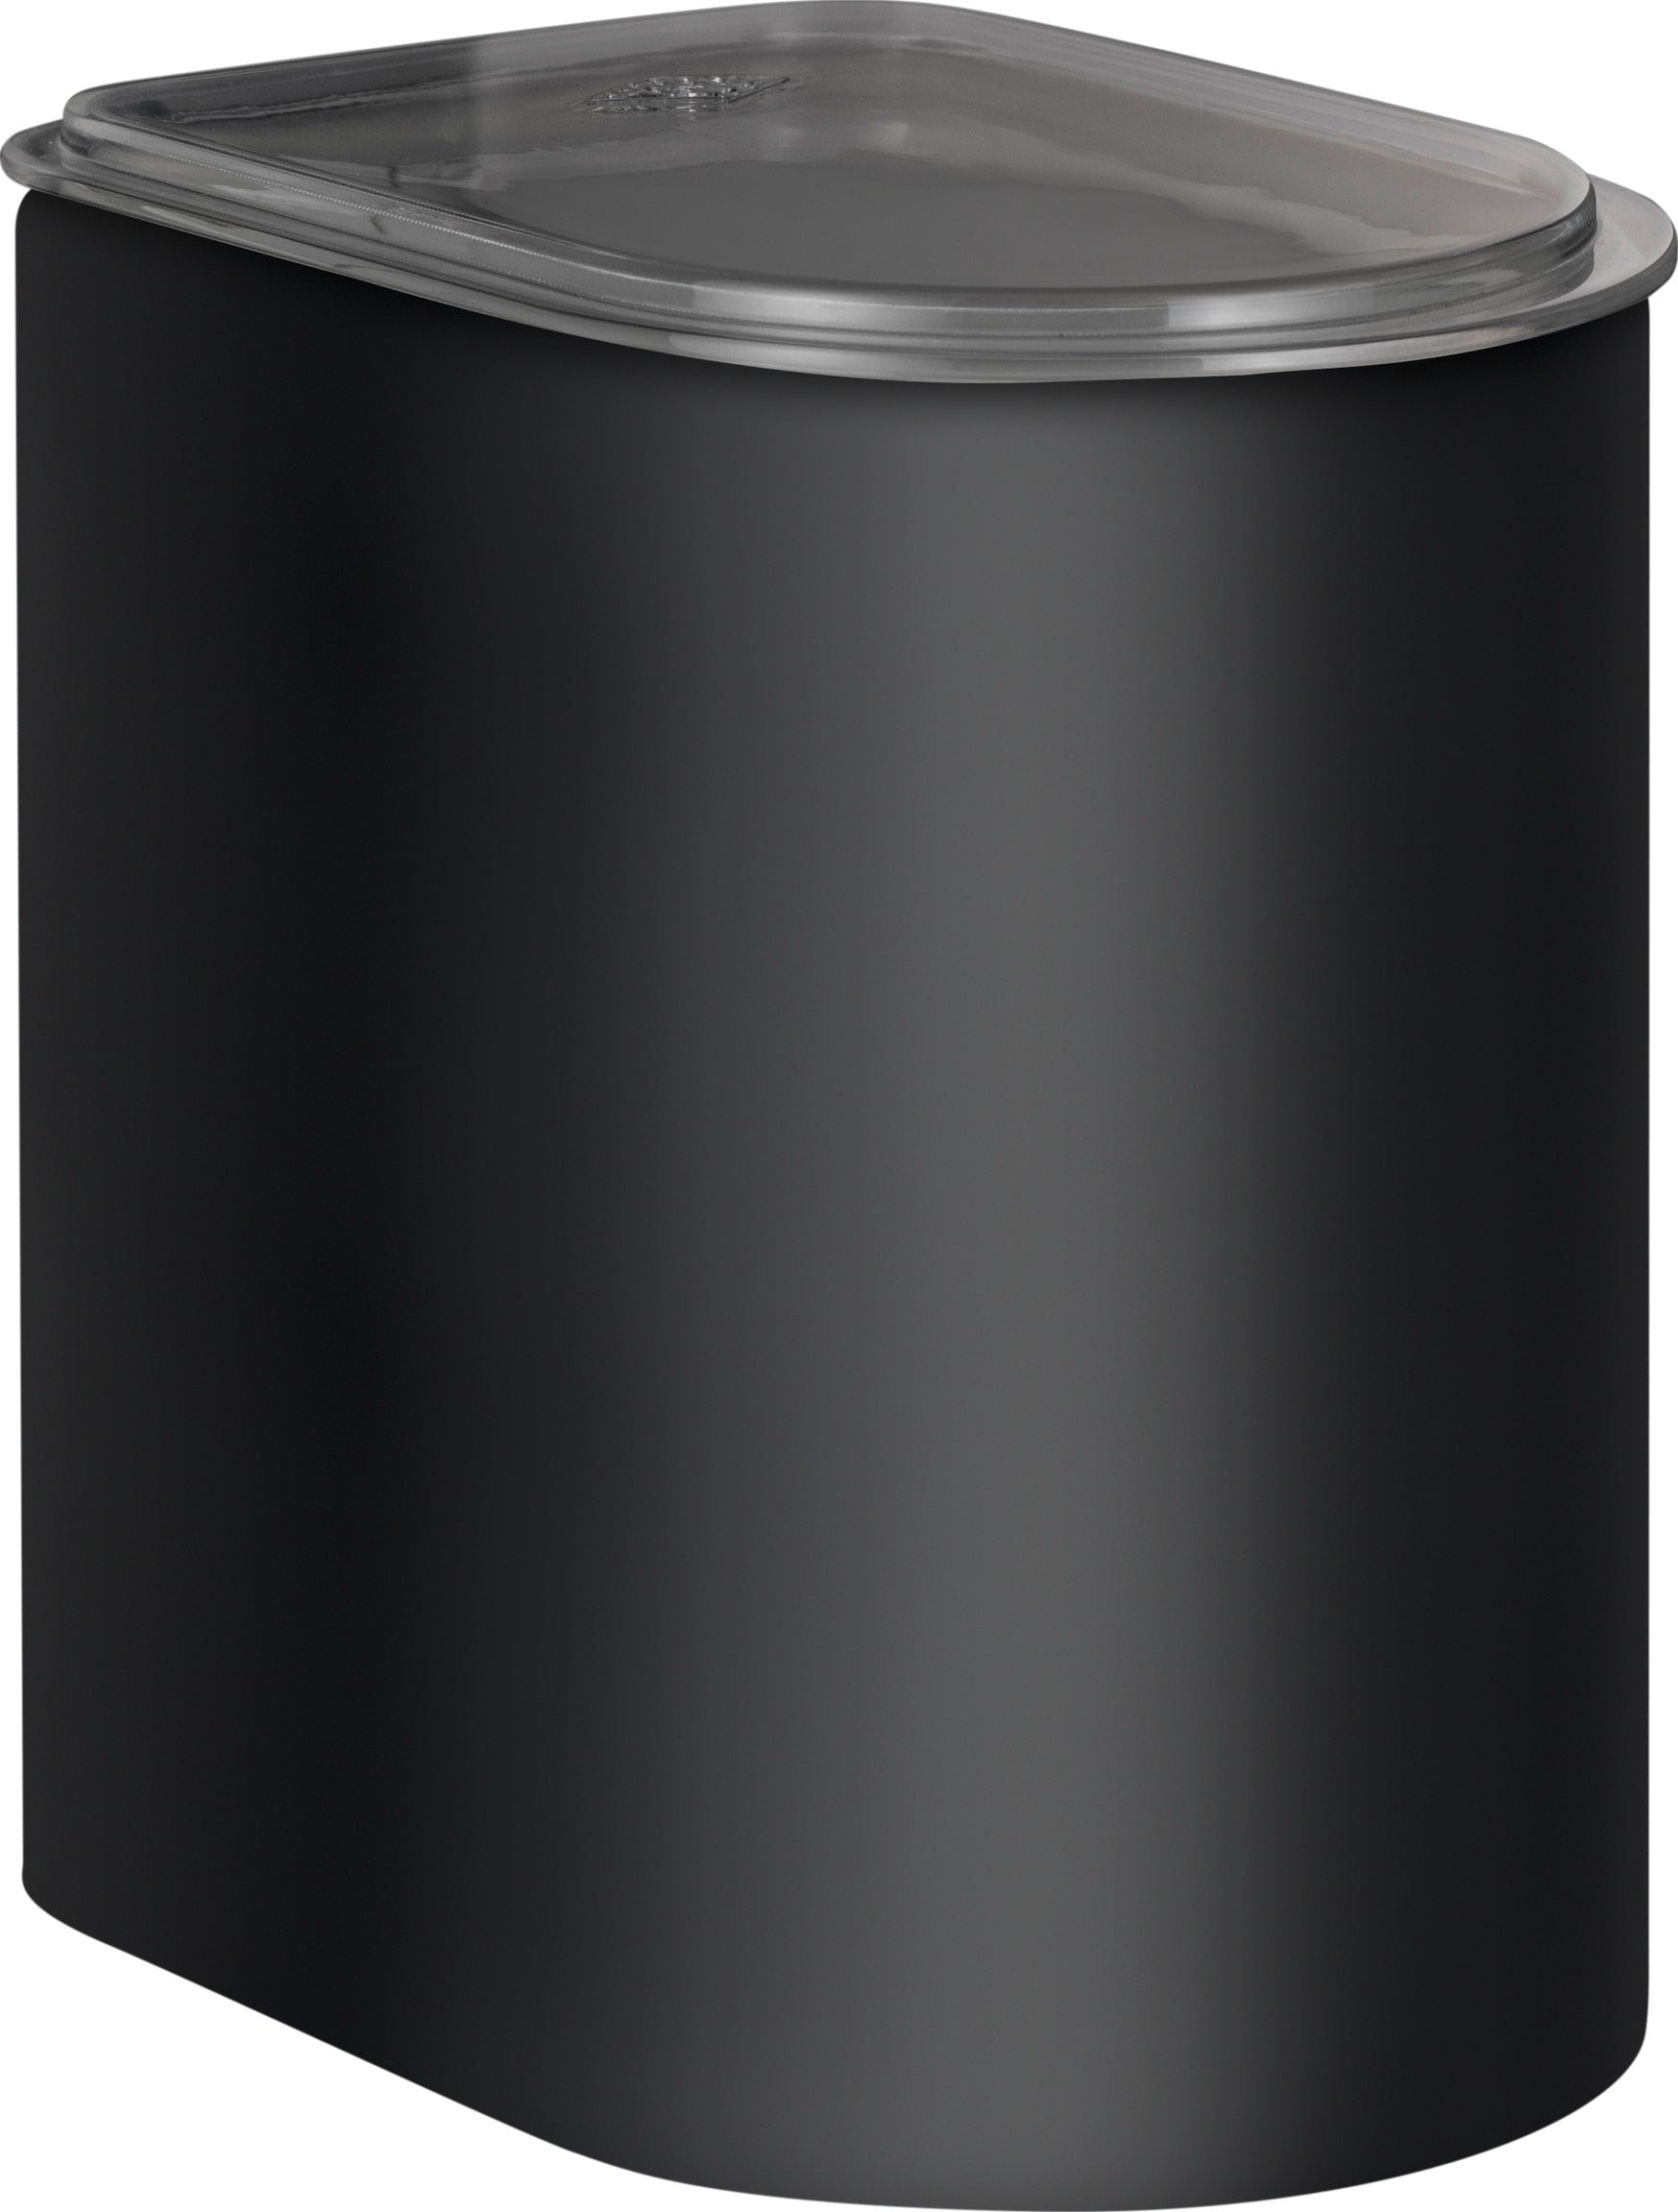 Wesco Canister 2,2 Litre With Acrylic Lid, Black Matt